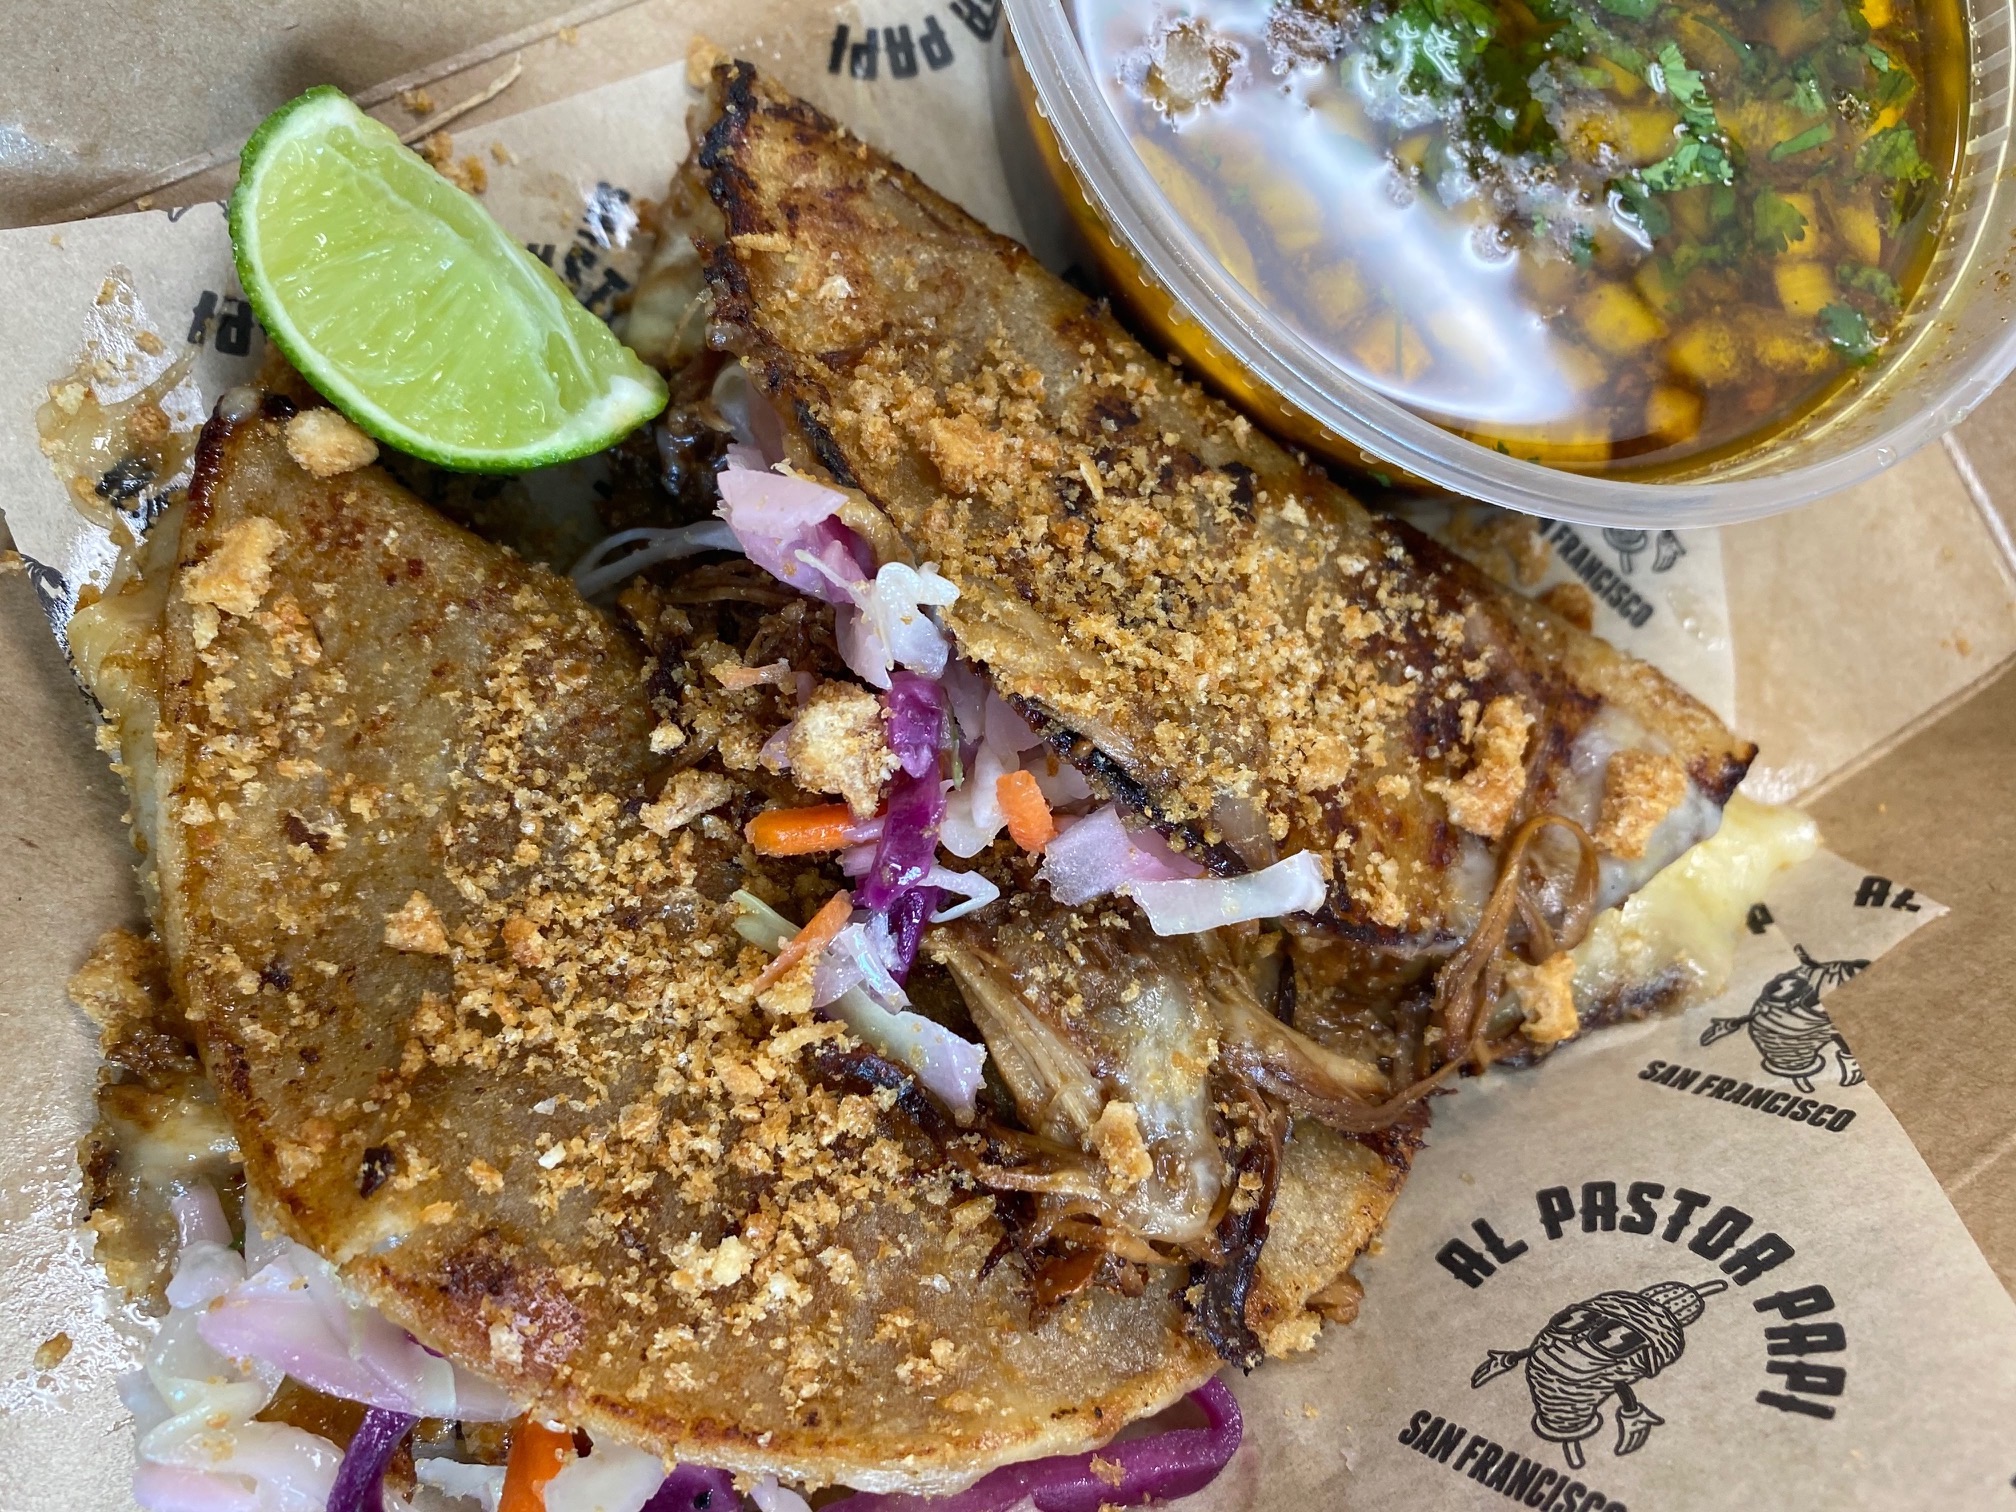 Two crispy chicken adobo tacos dusted with crushed fried pork skin, accented with a colorful cabbage slaw